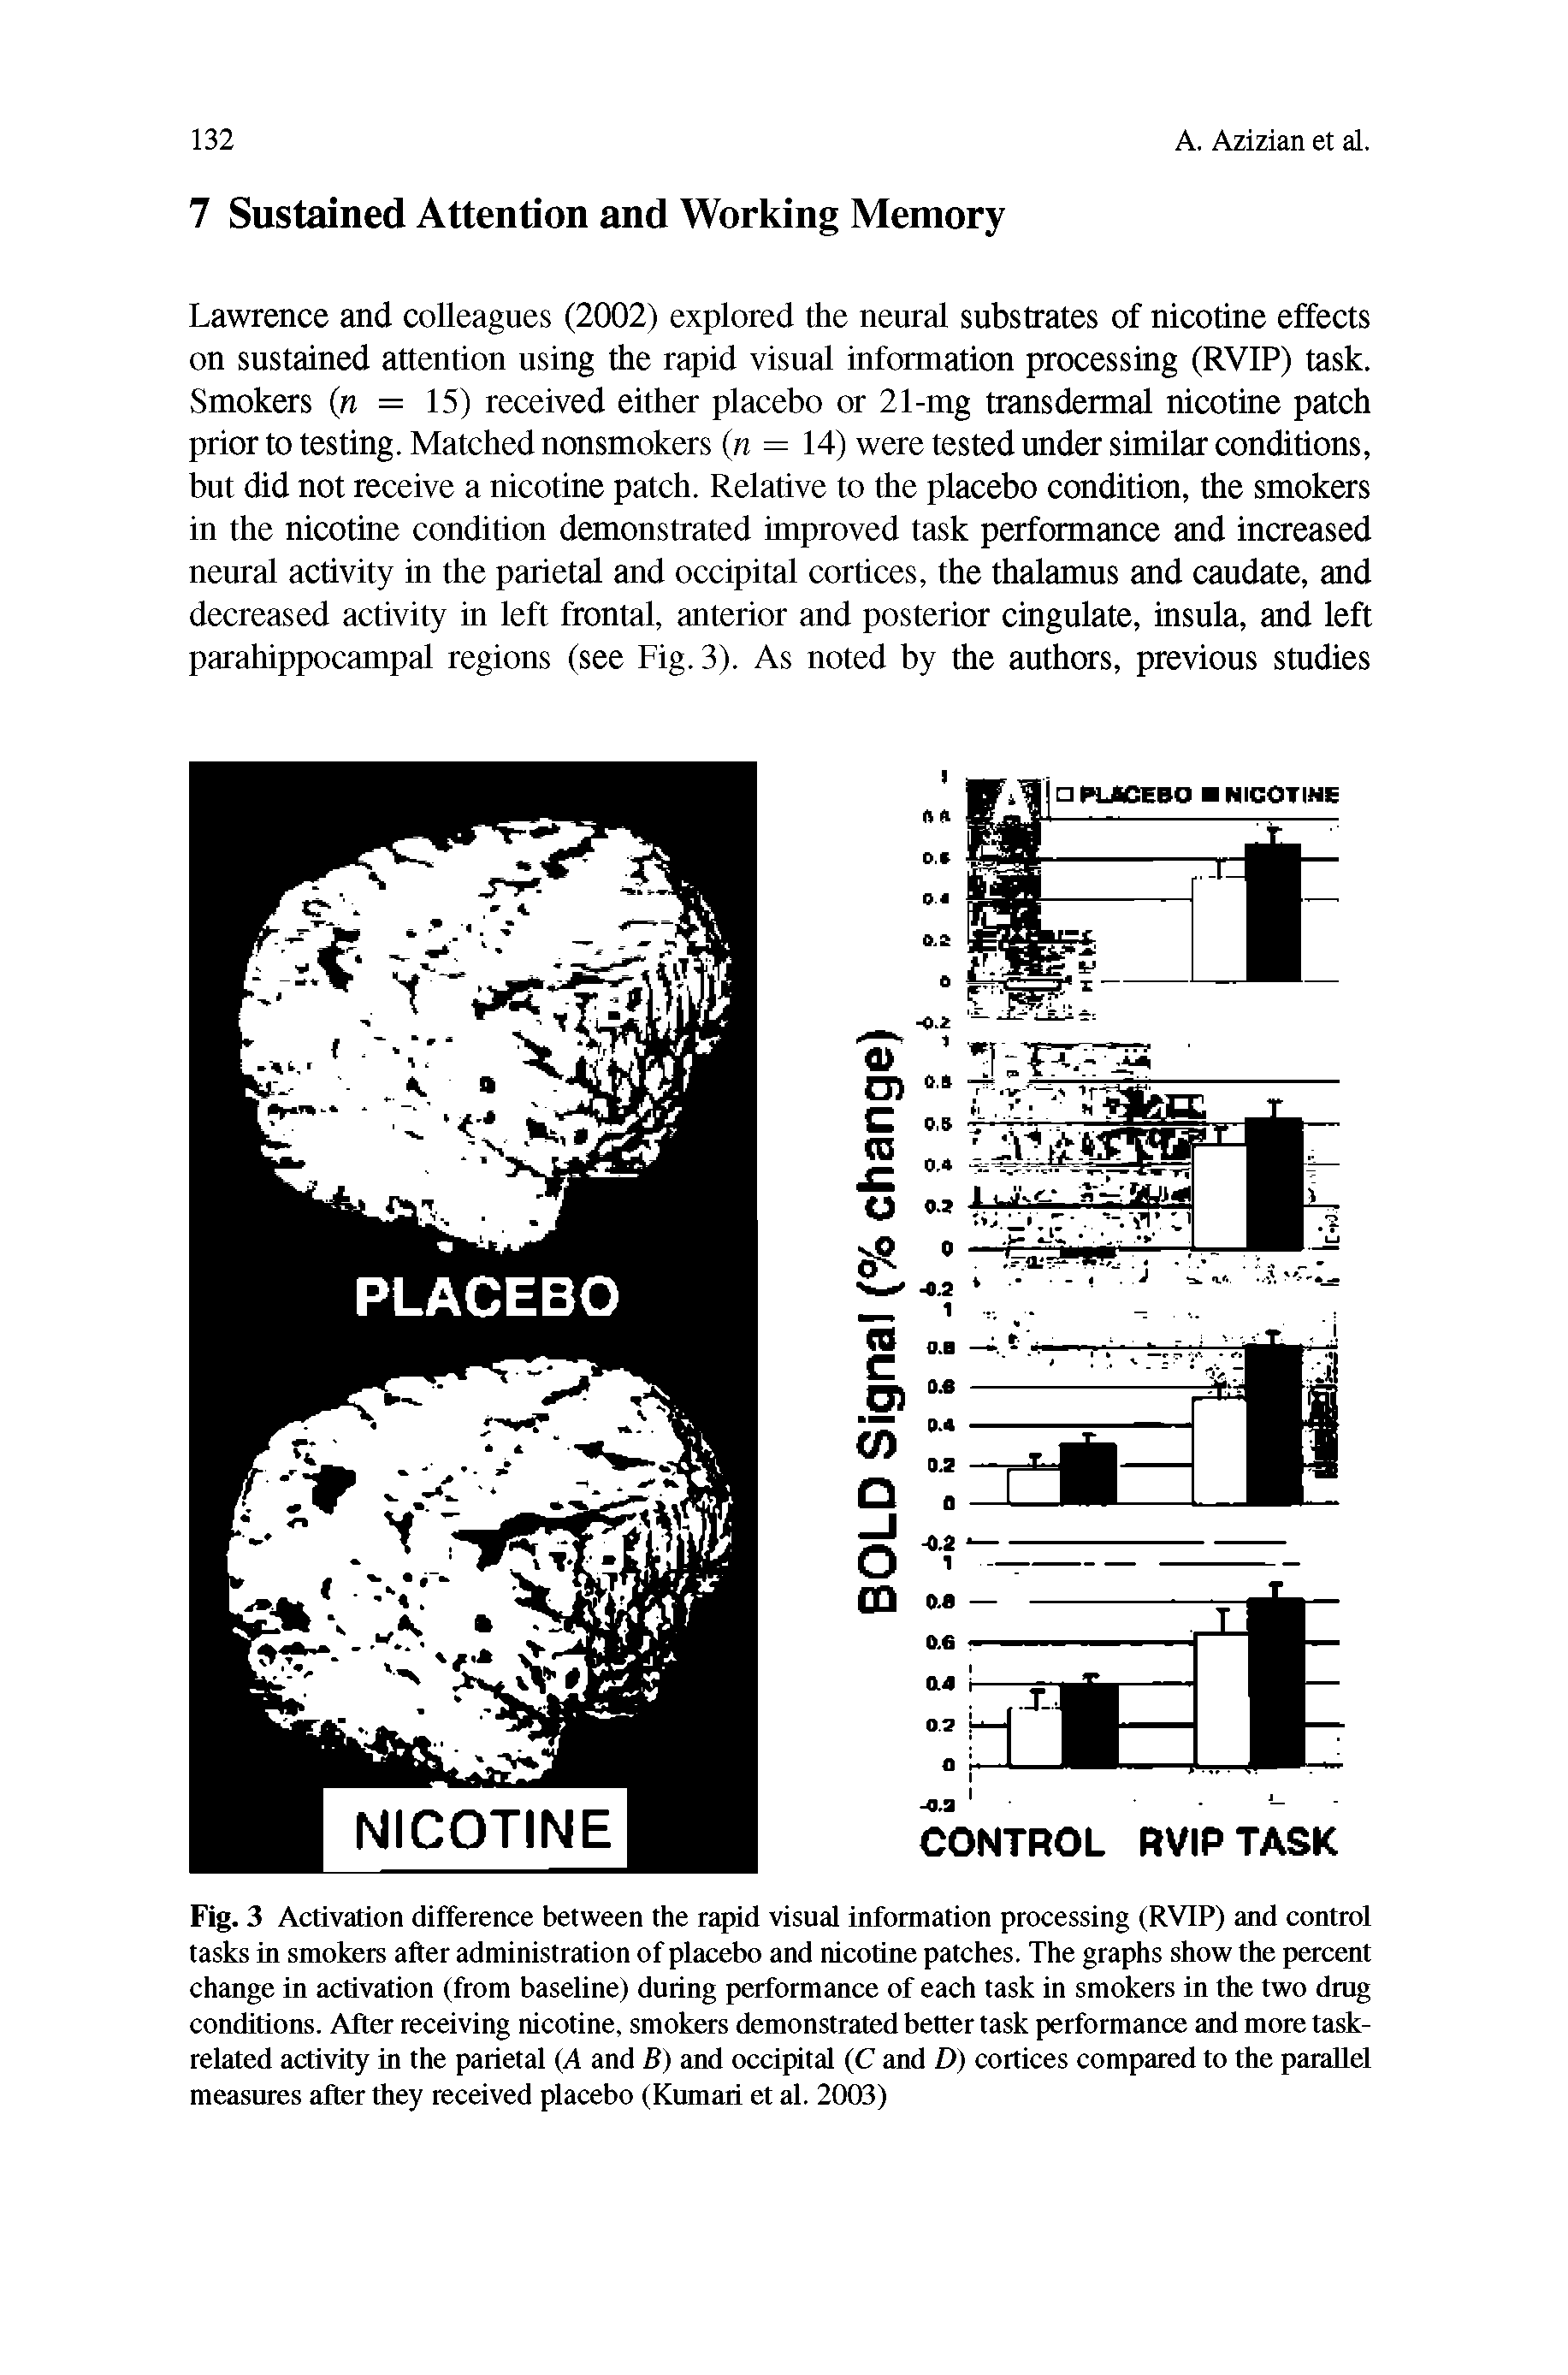 Fig. 3 Activation difference between the rapid visual information processing (RVIP) and control tasks in smokers after administration of placebo and nicotine patches. The graphs show the percent change in activation (from baseline) during performance of each task in smokers in the two drug conditions. After receiving nicotine, smokers demonstrated better task performance and more task-related activity in the parietal (A and B) and occipital (C and D) cortices compared to the parallel measures after they received placebo (Kumari et al. 2003)...